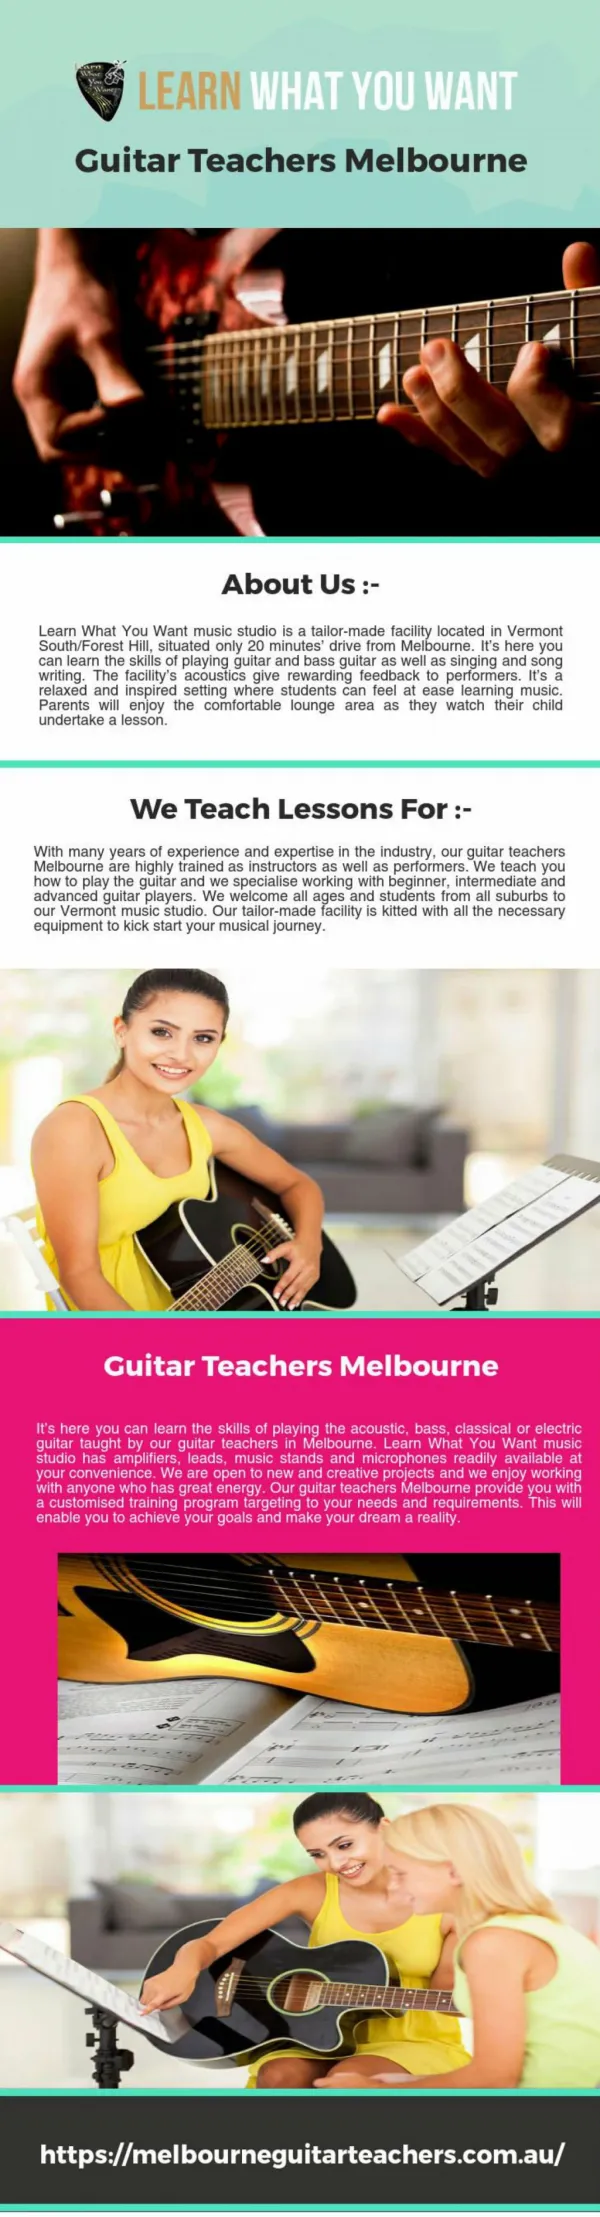 Searching For Guitar Teachers Melbourne?